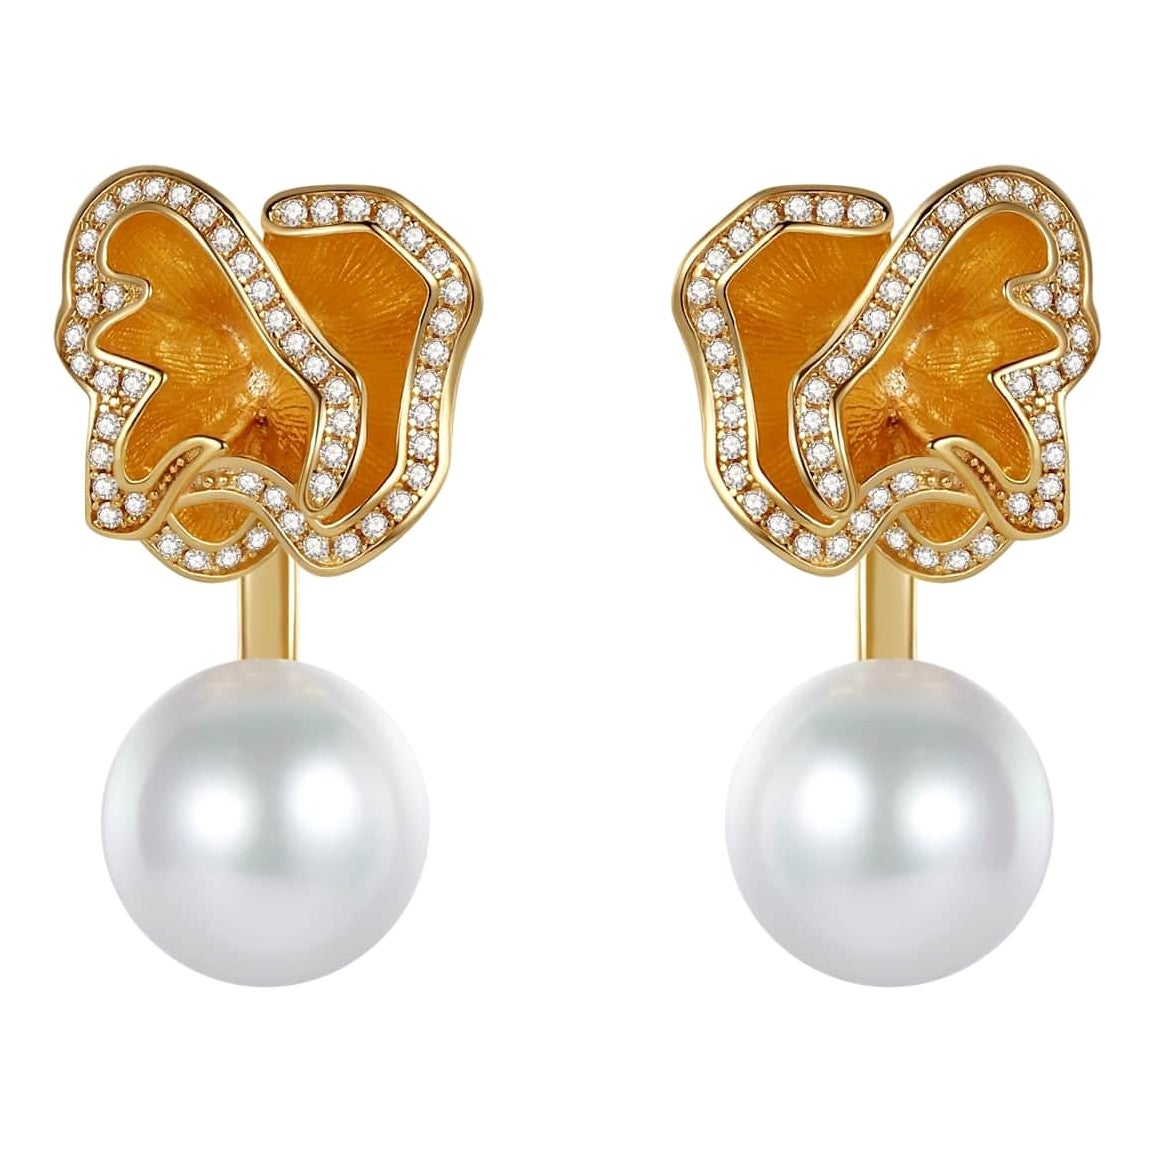 Quintessence Pearl with Flower Basket Earrings, White